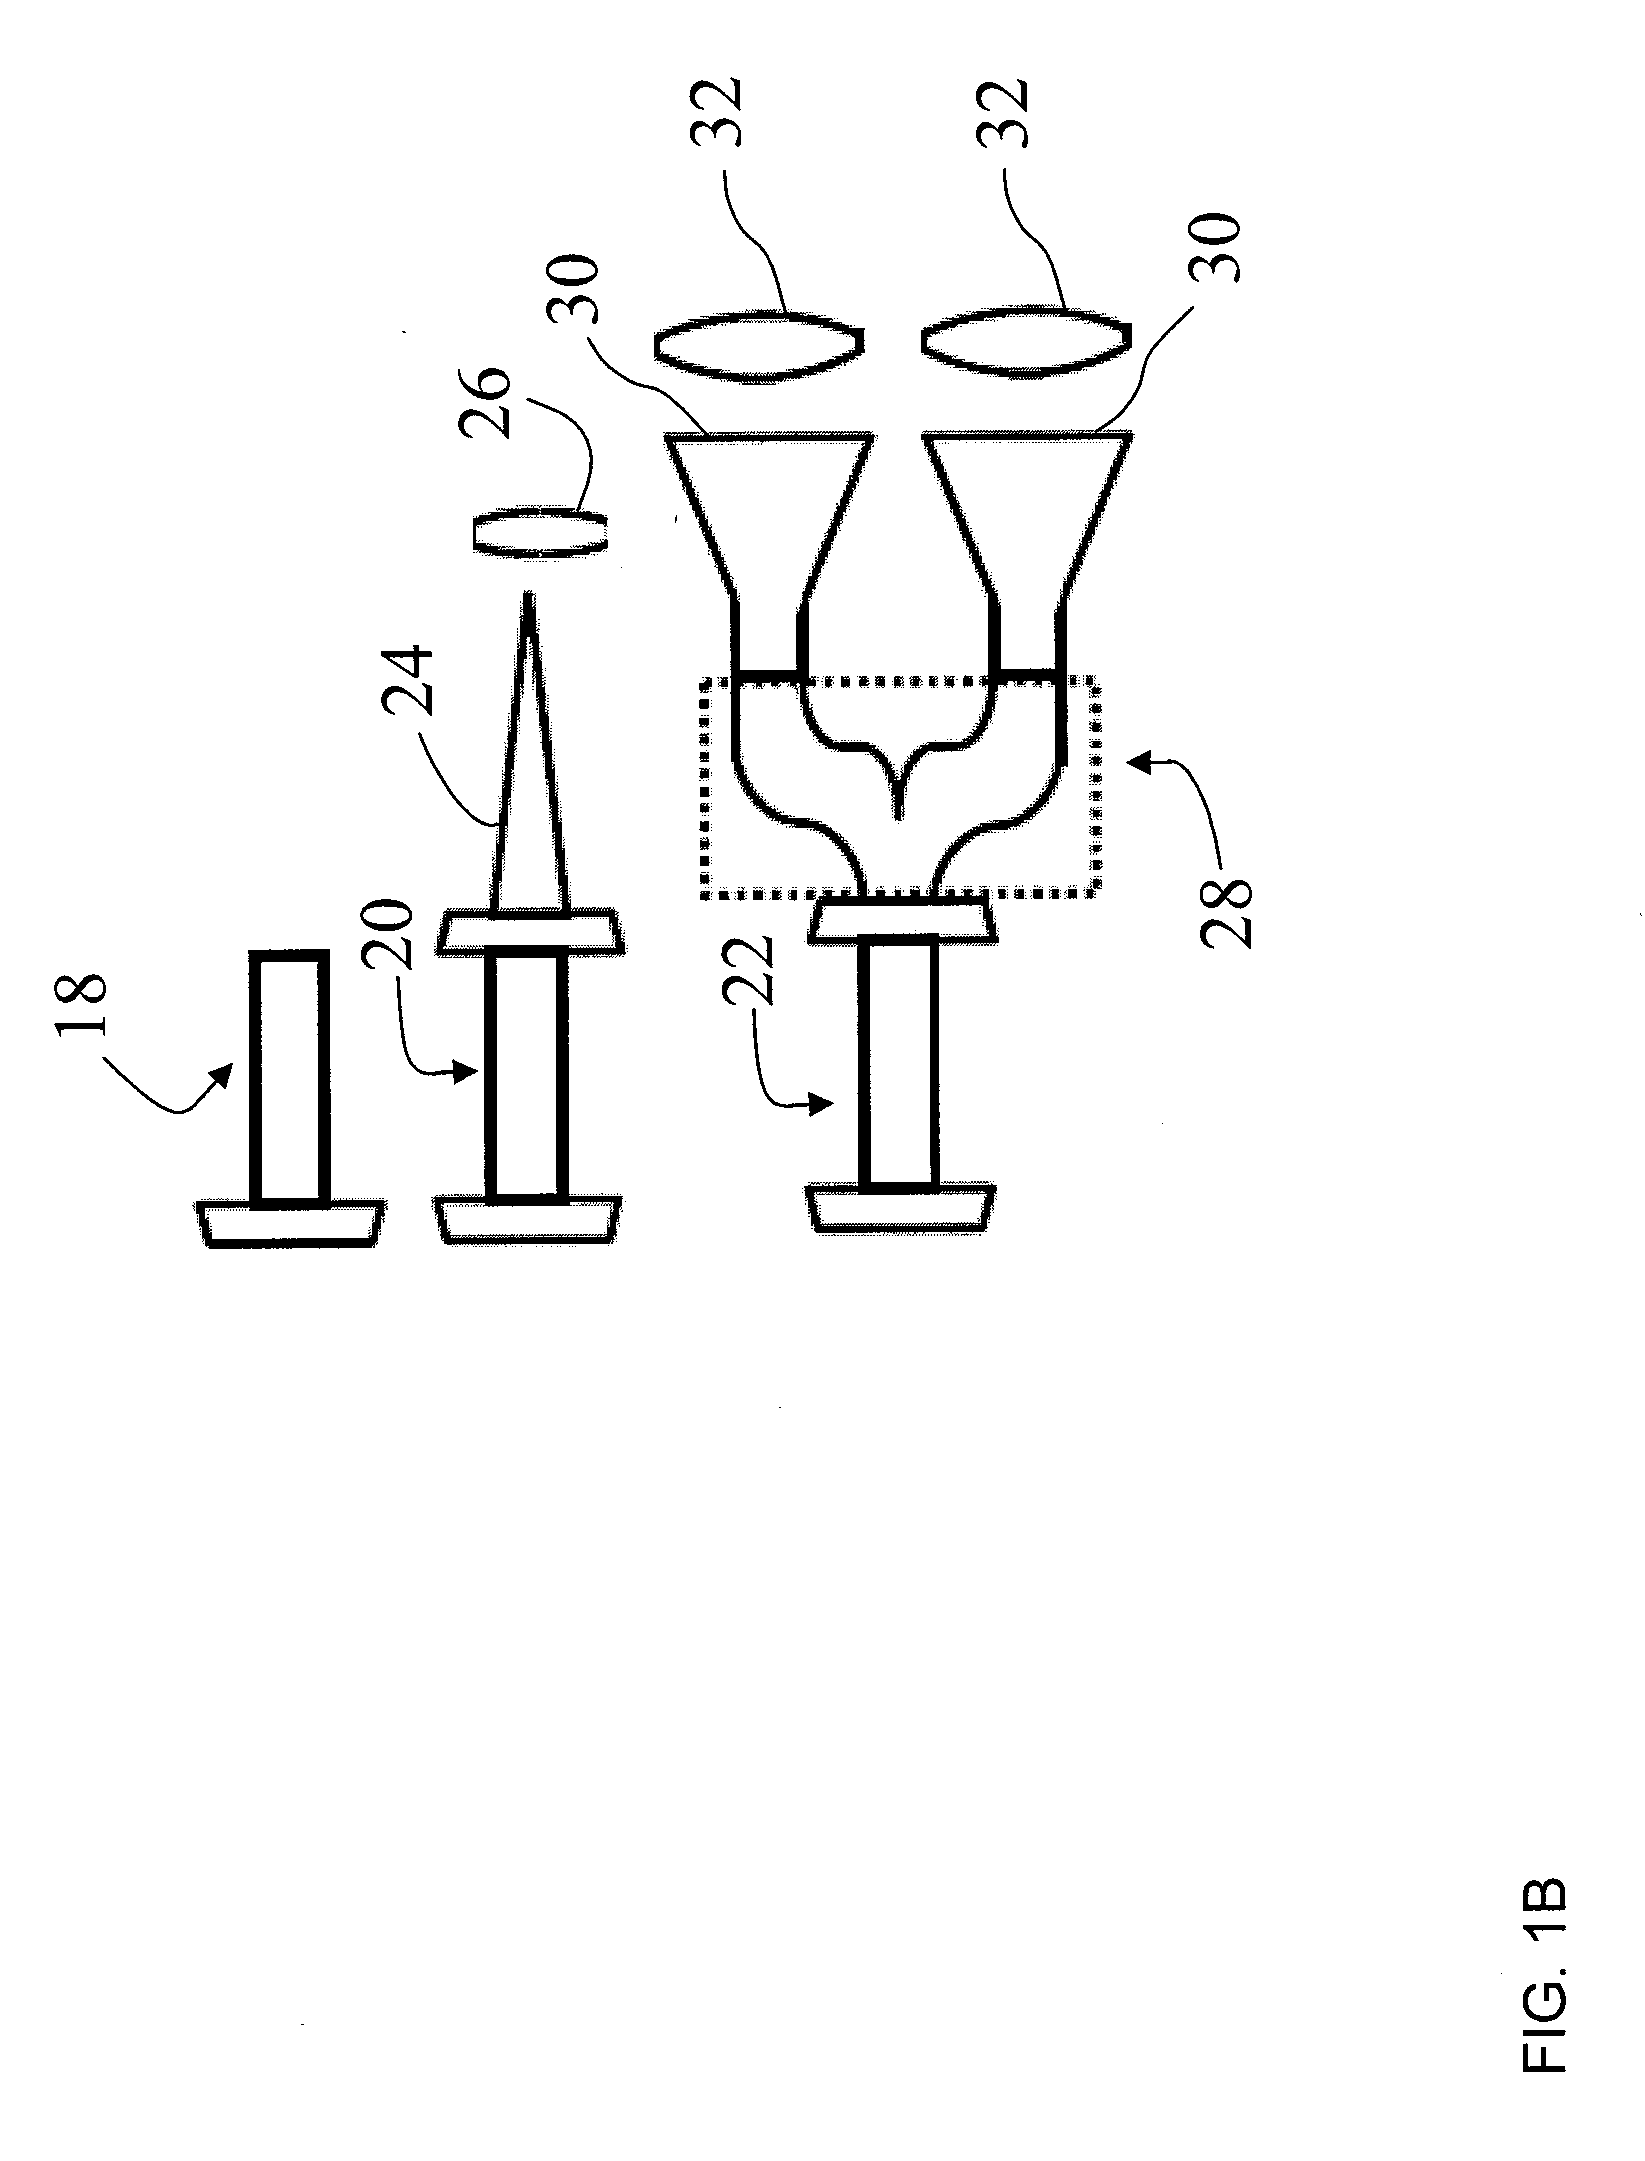 Systems and Methods for Diagnostics, Control and Treatment of Neurological Functions and Disorders by Exposure to Electromagnetic Waves